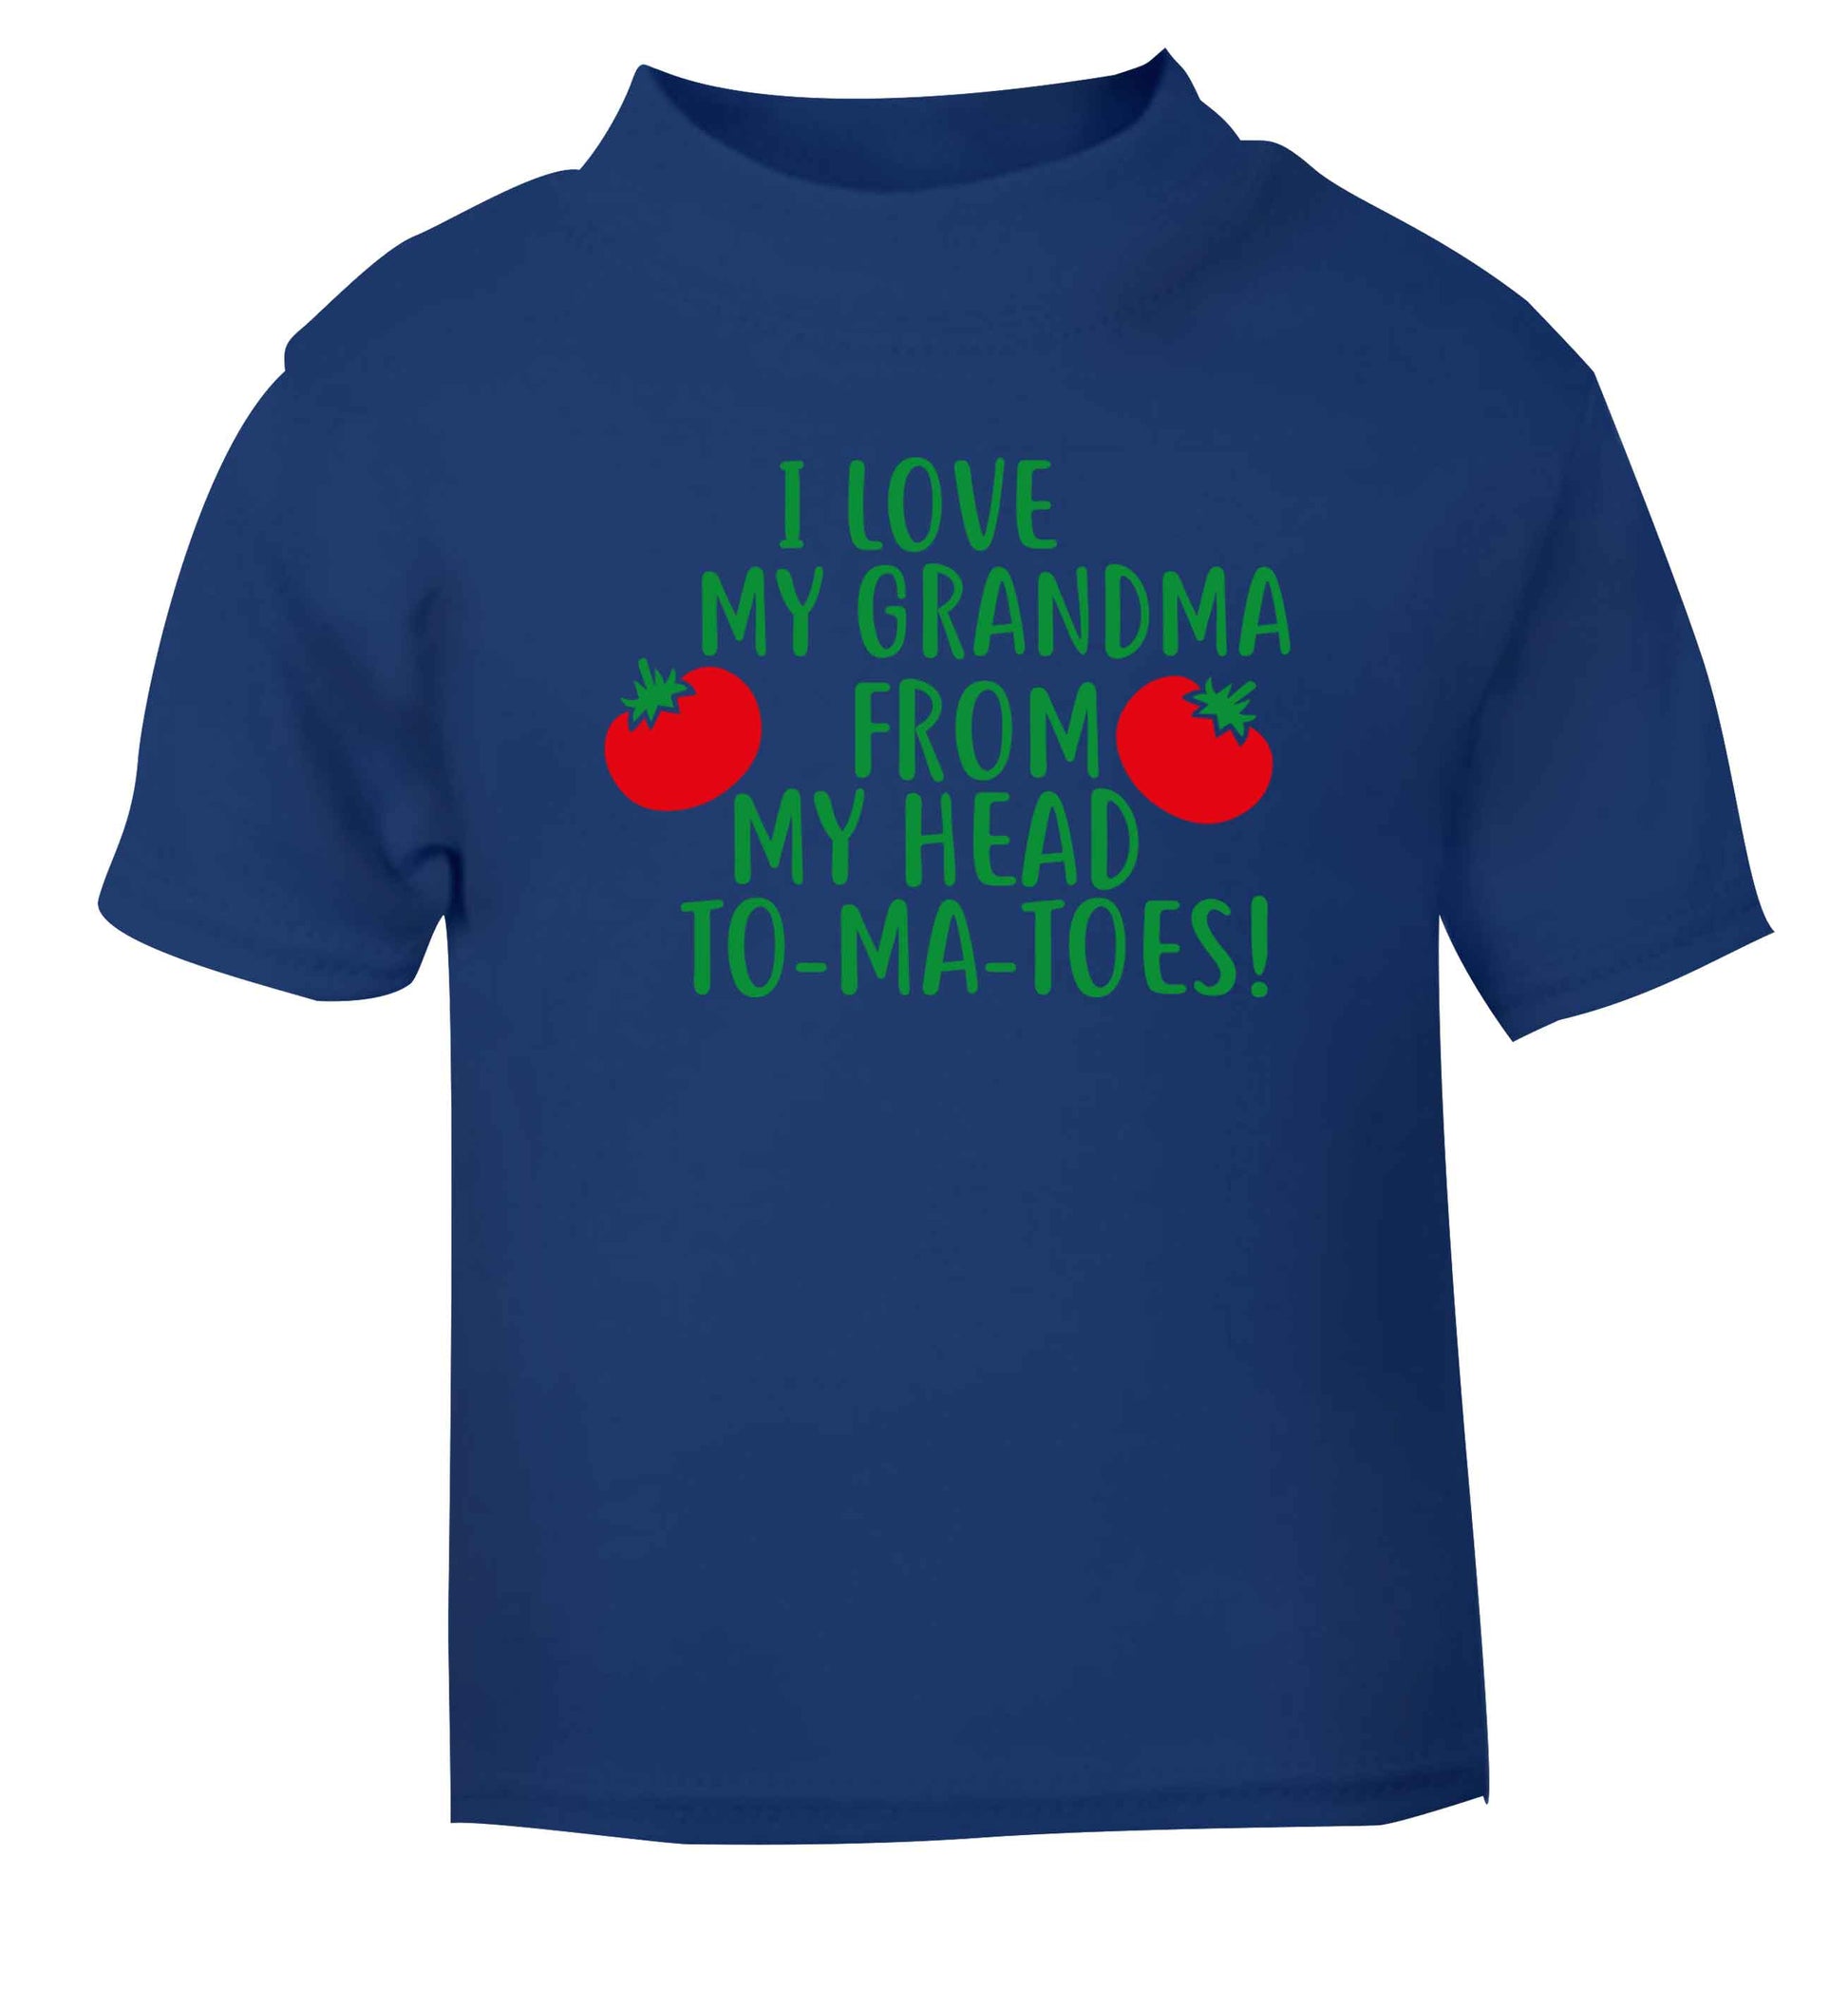 I love my grandma from my head to-ma-toes blue Baby Toddler Tshirt 2 Years